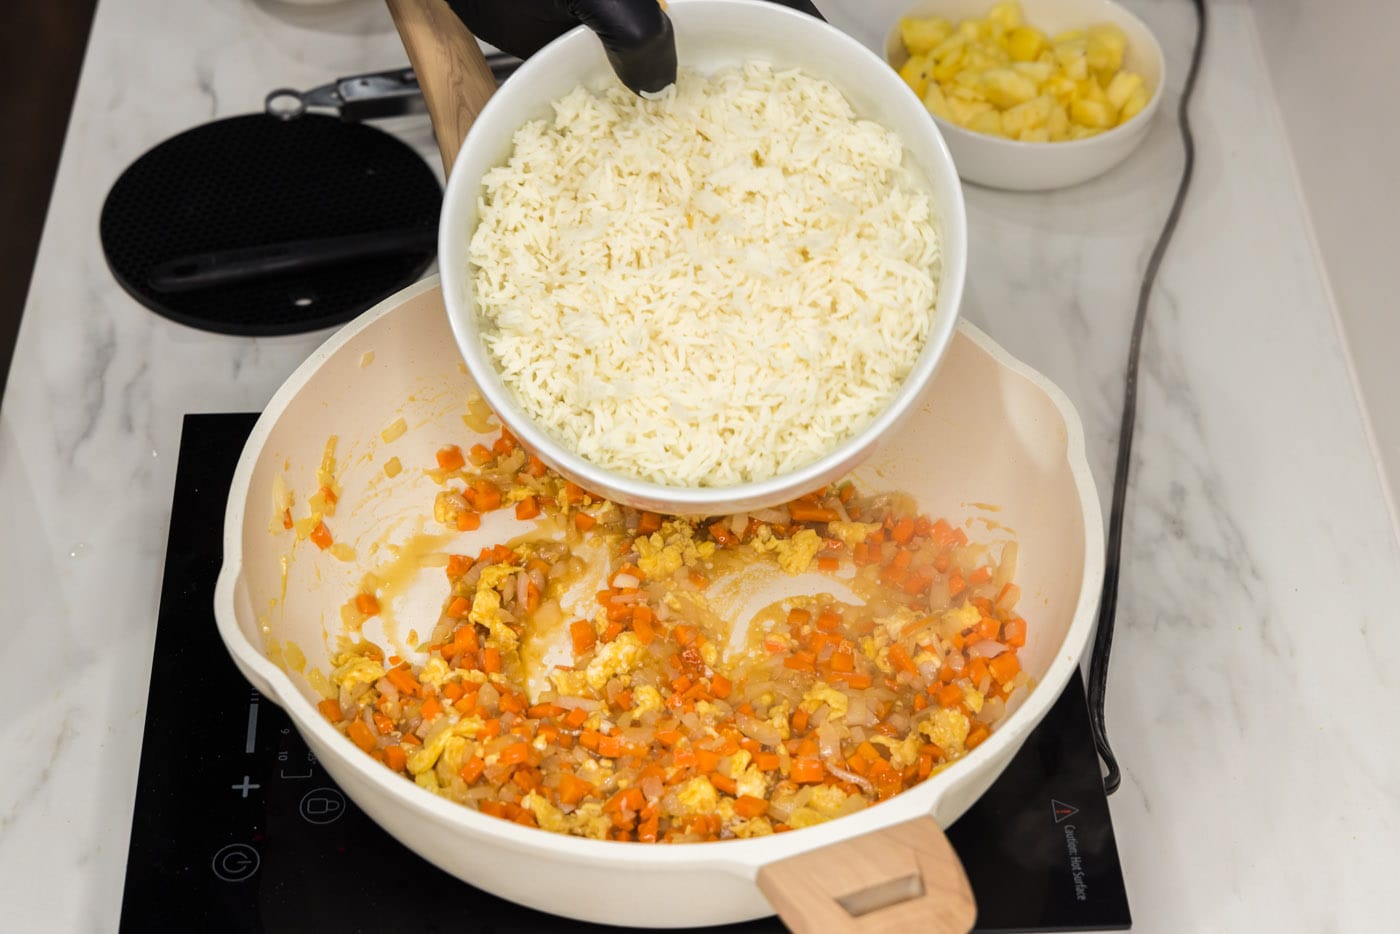 cooked rice added to pan of stir fried veggies and egg